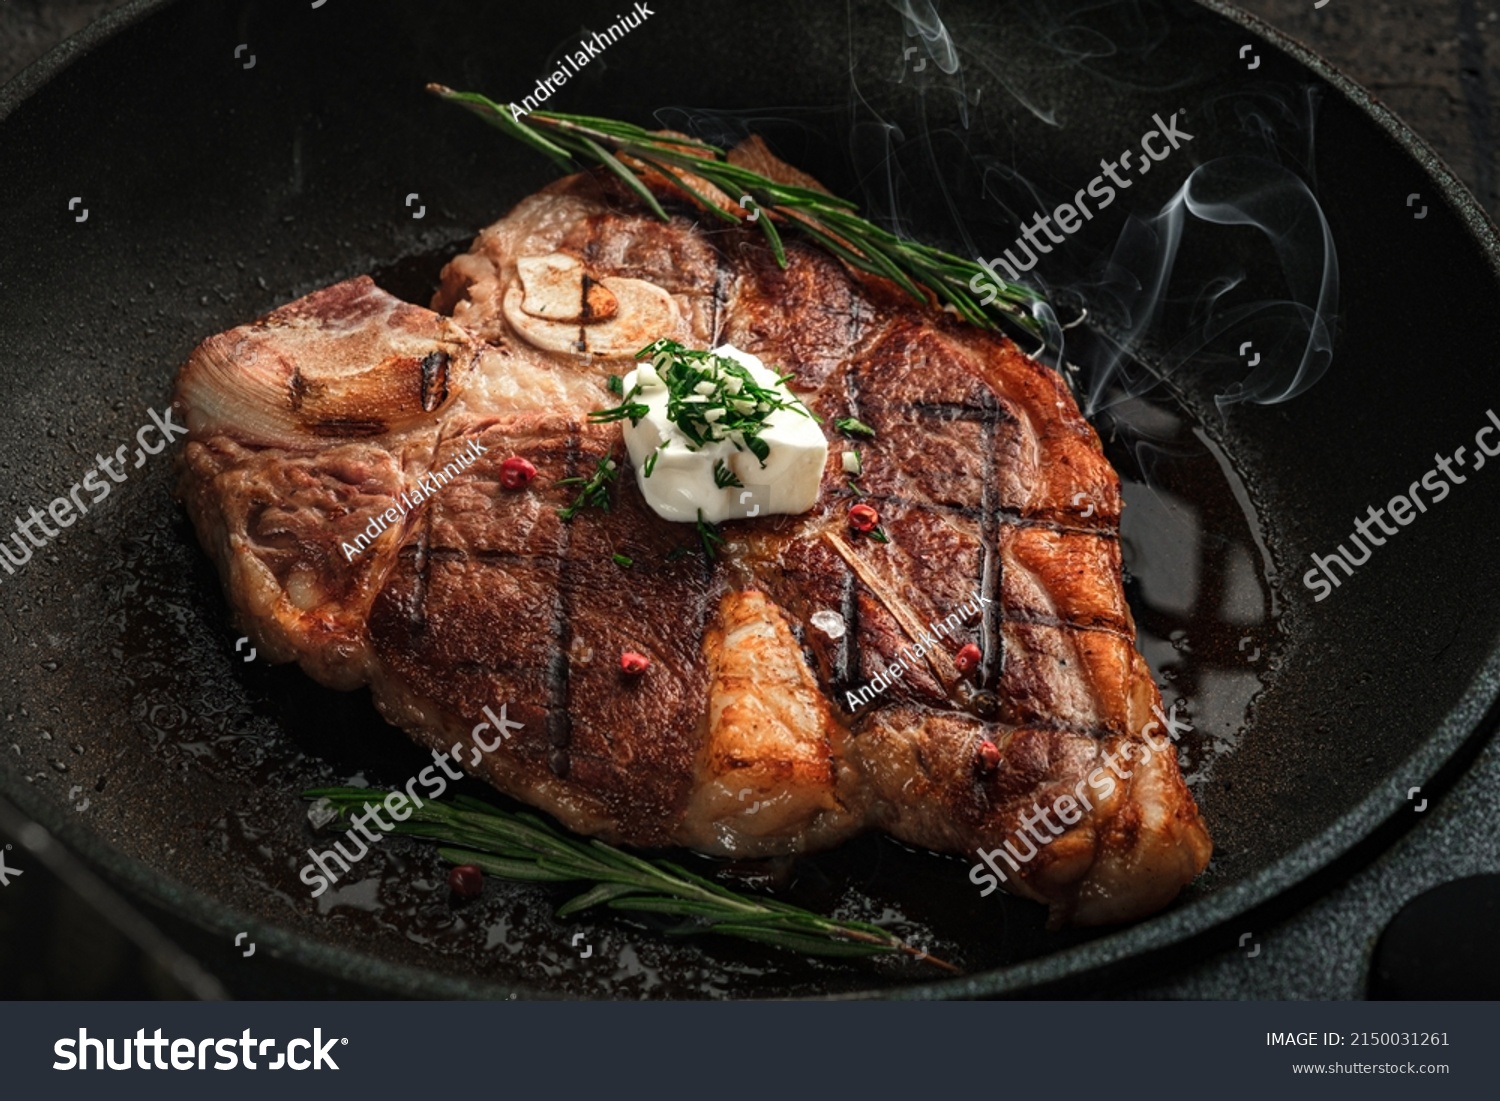 T-bone steak steaming in a grill pan with spices, rosemary and butter. Premium Porterhouse steak on the bone #2150031261